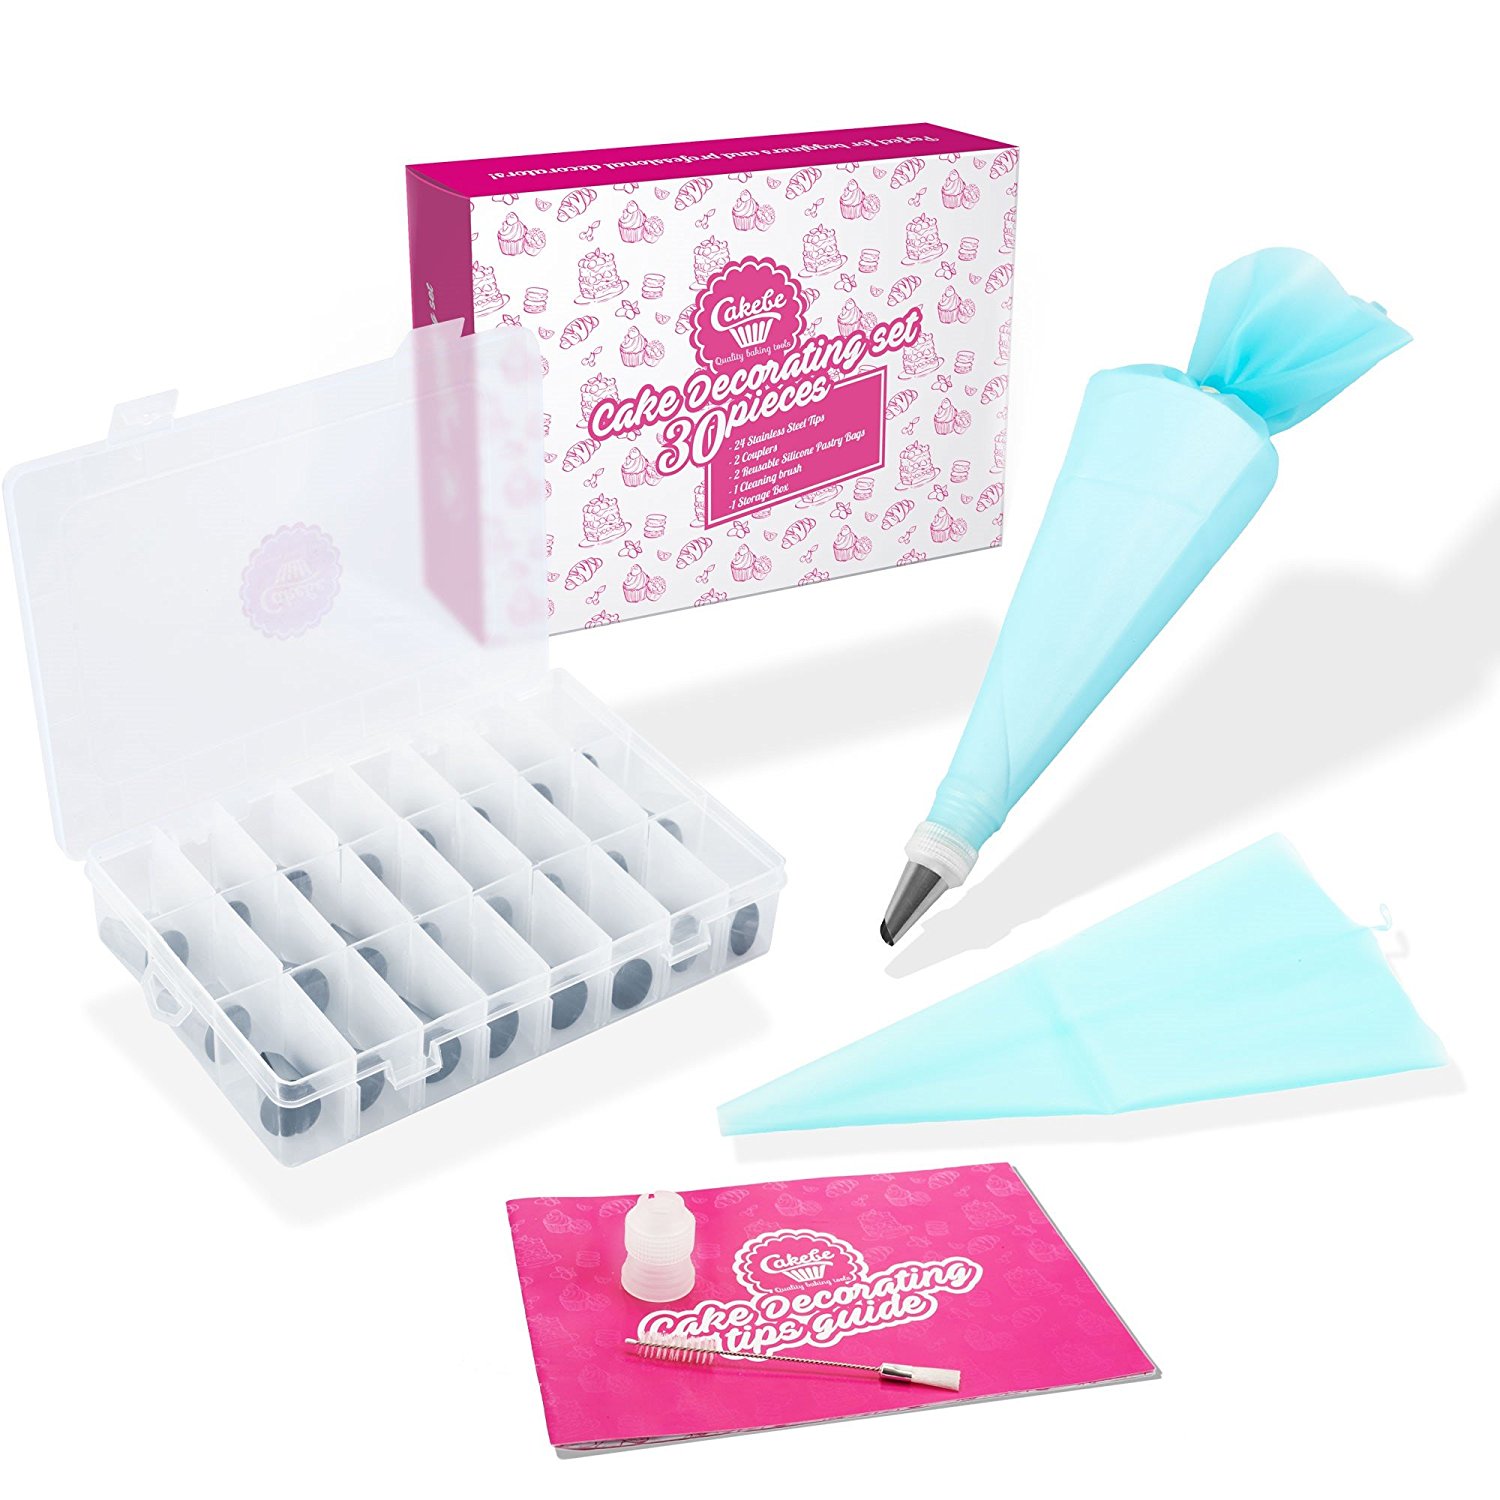 Cake Decorating Kit Includes Nozzle, Tips, Reusable Pastry ...